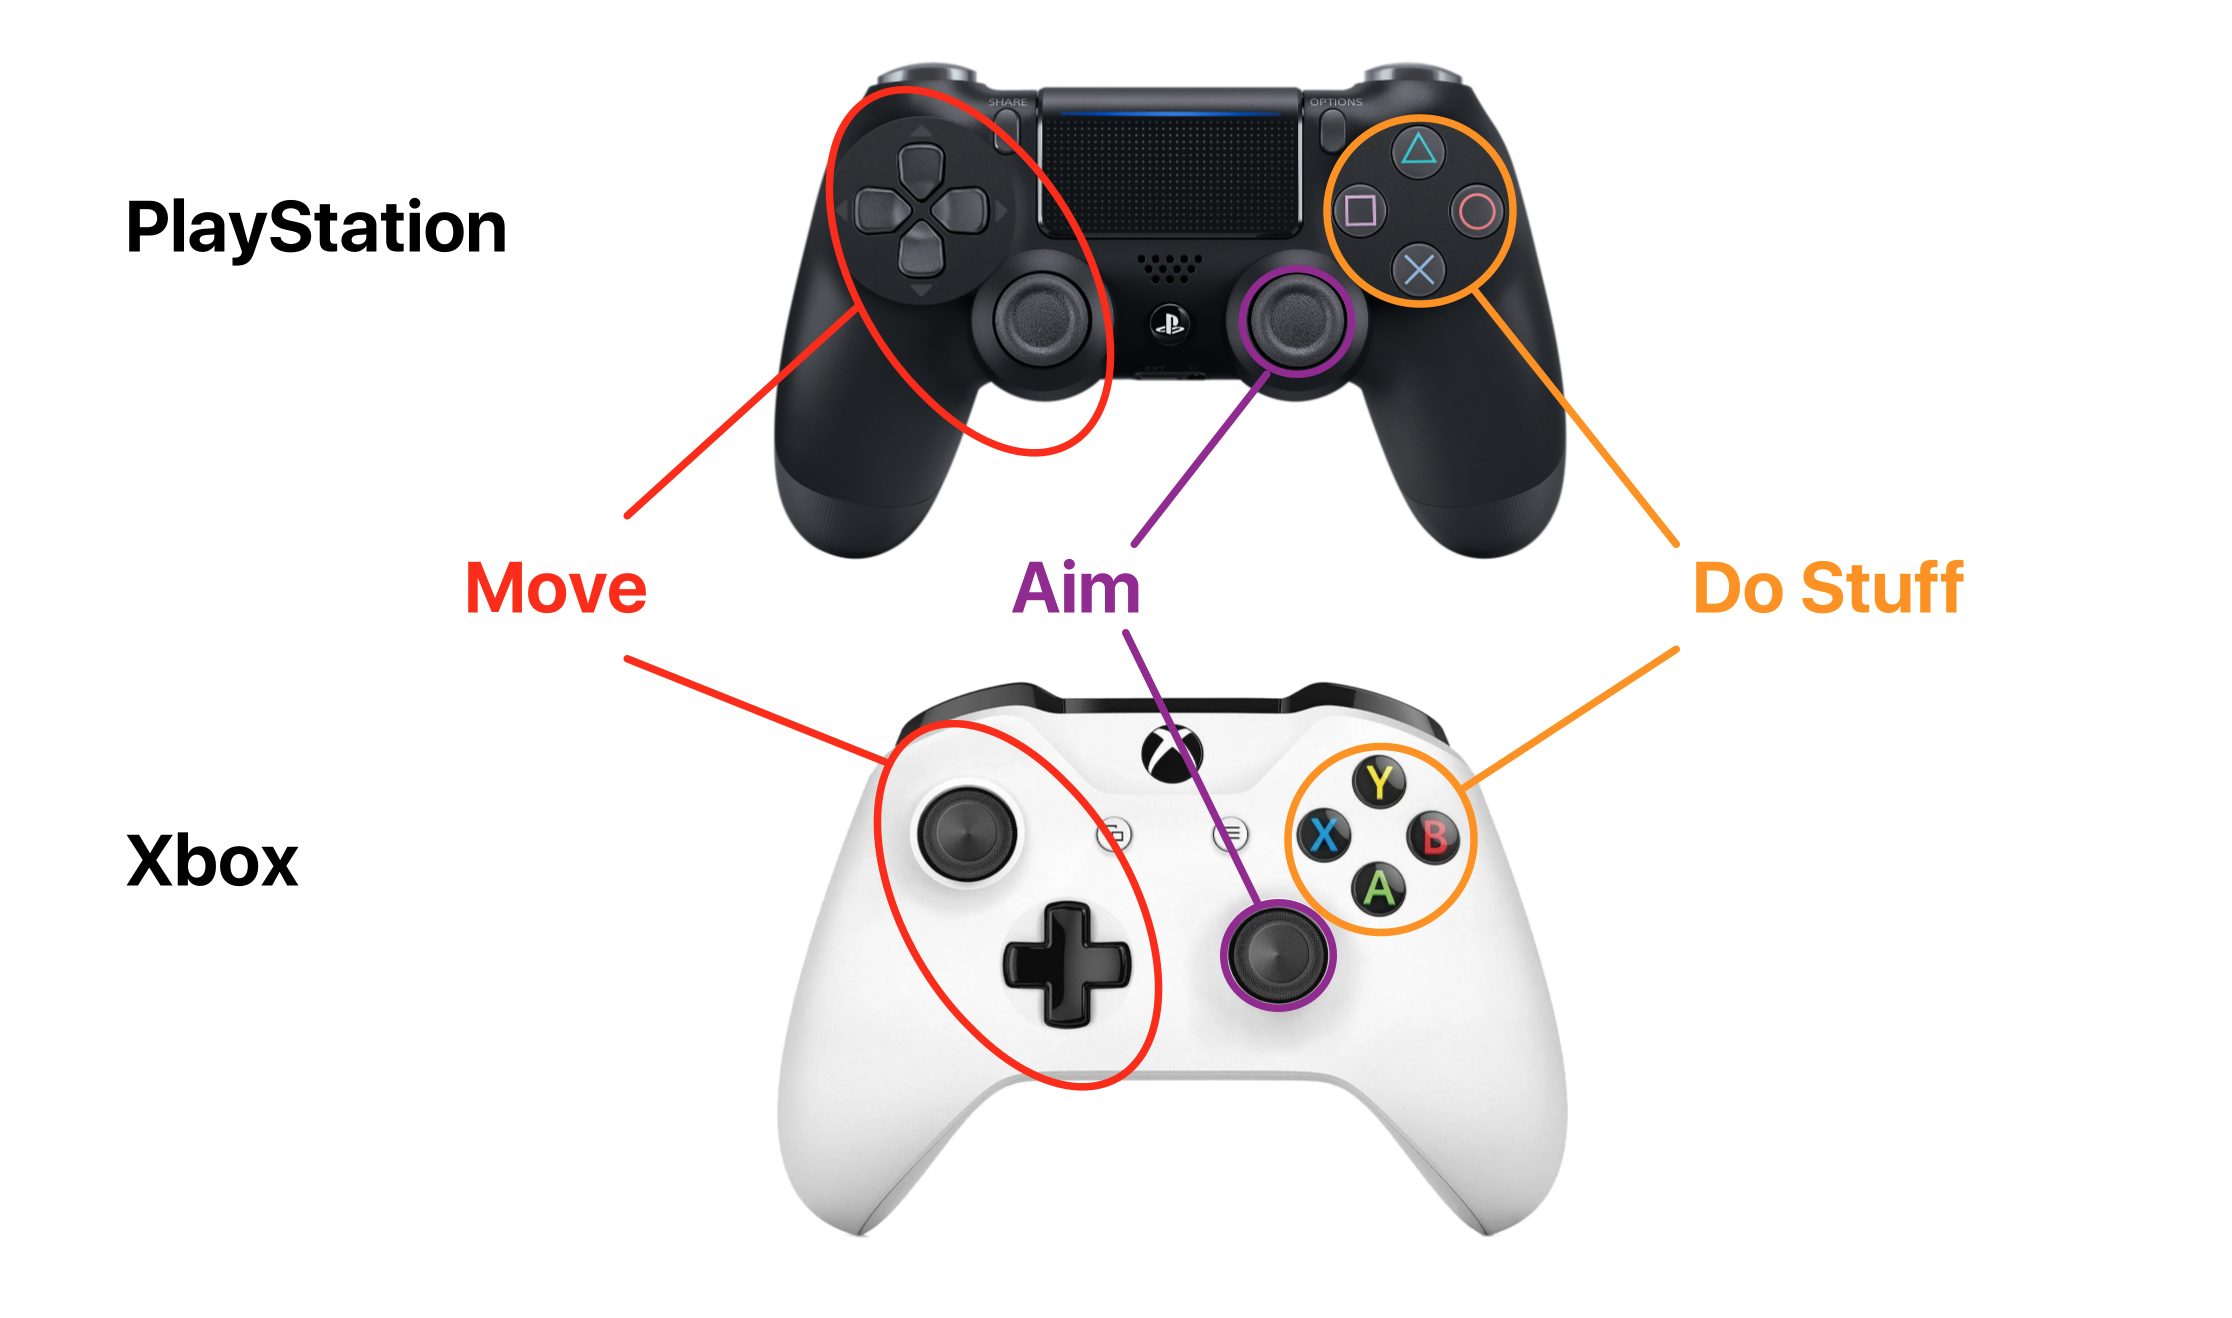 Common controller conventions